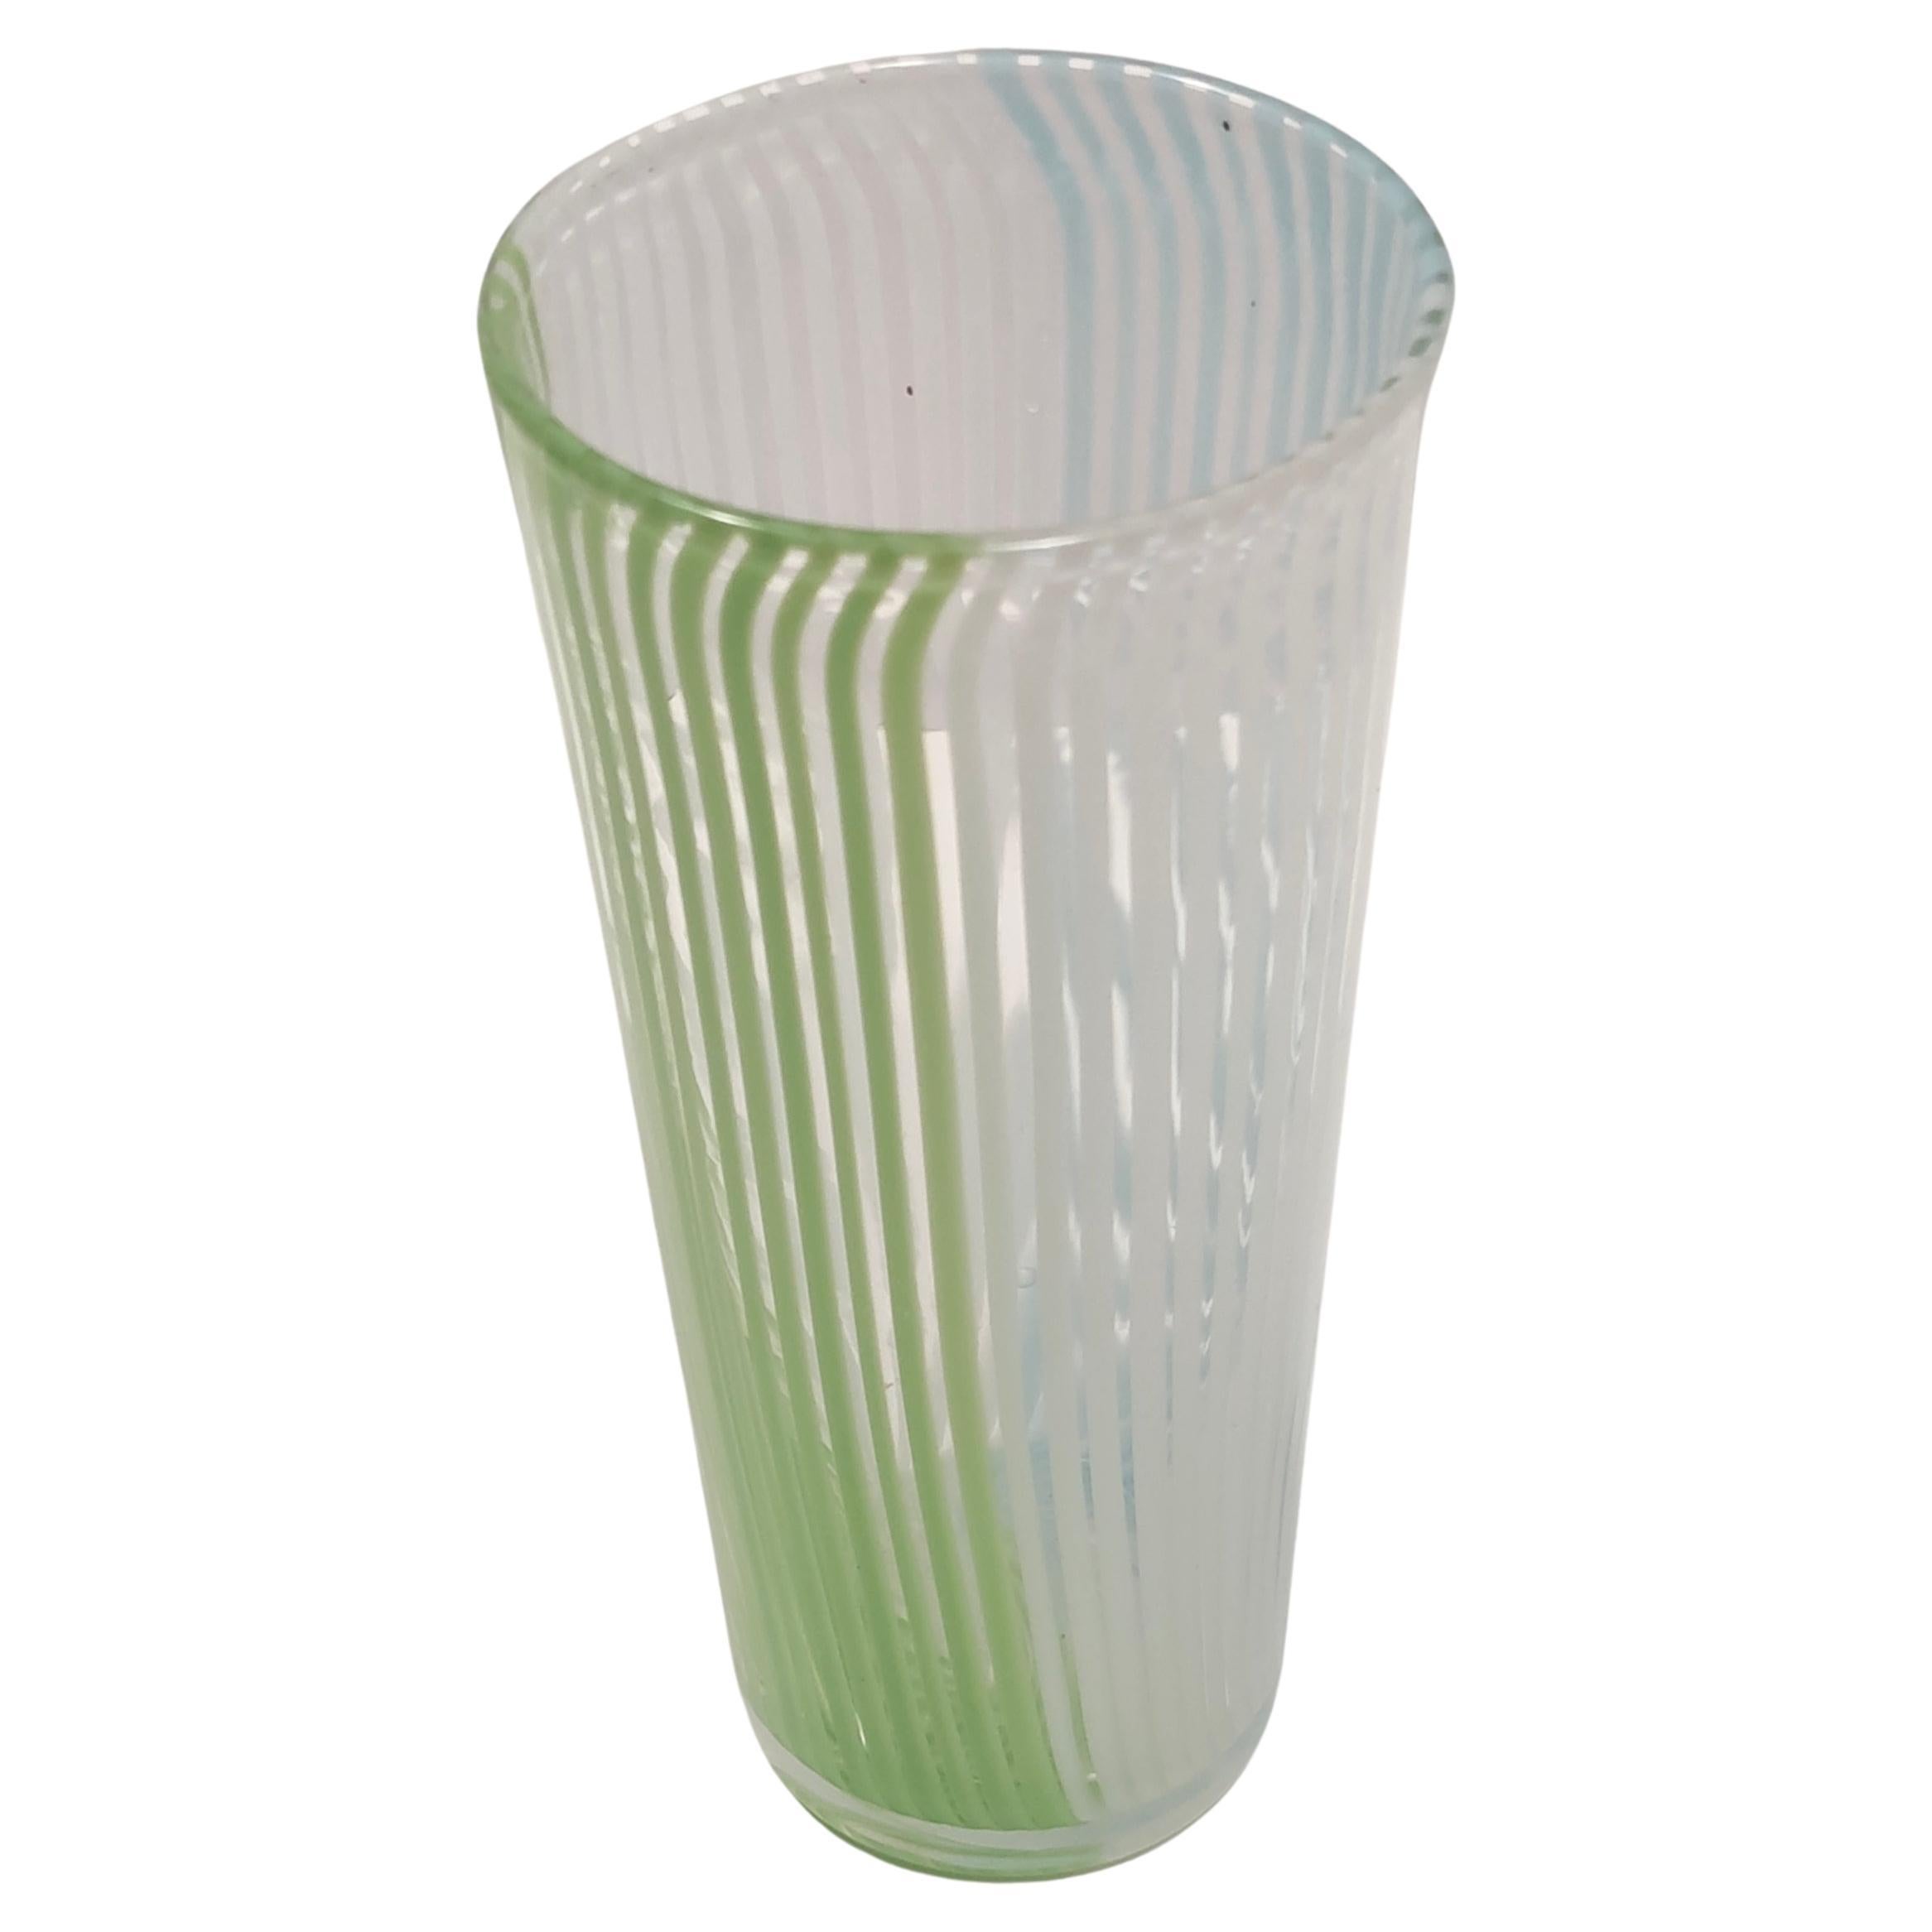 Vintage Green, White and Light Blue Murano Glass Vase by Dino Martens For Sale